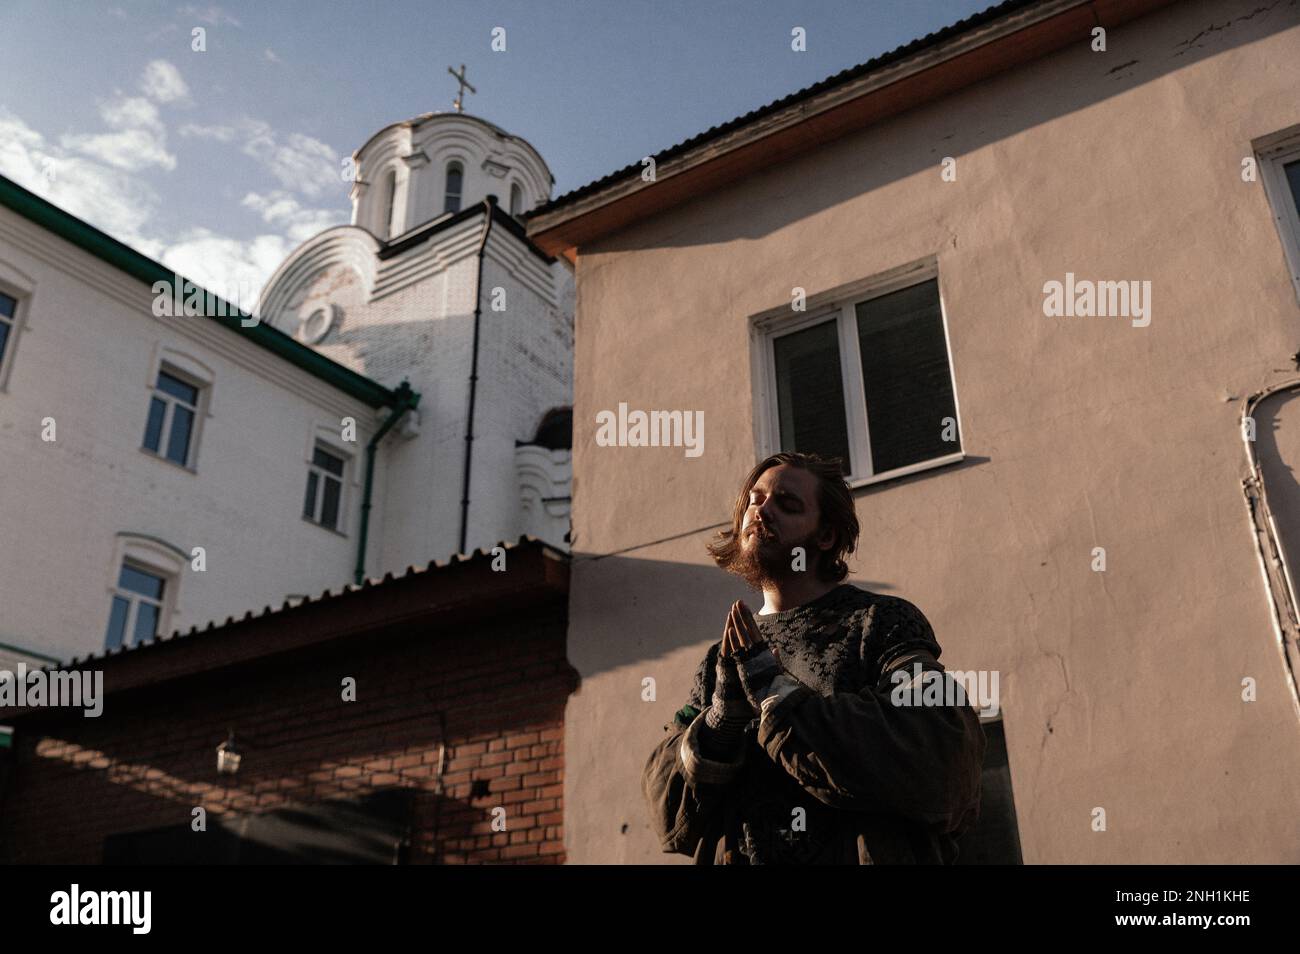 a homeless man prays against the background of a church Stock Photo